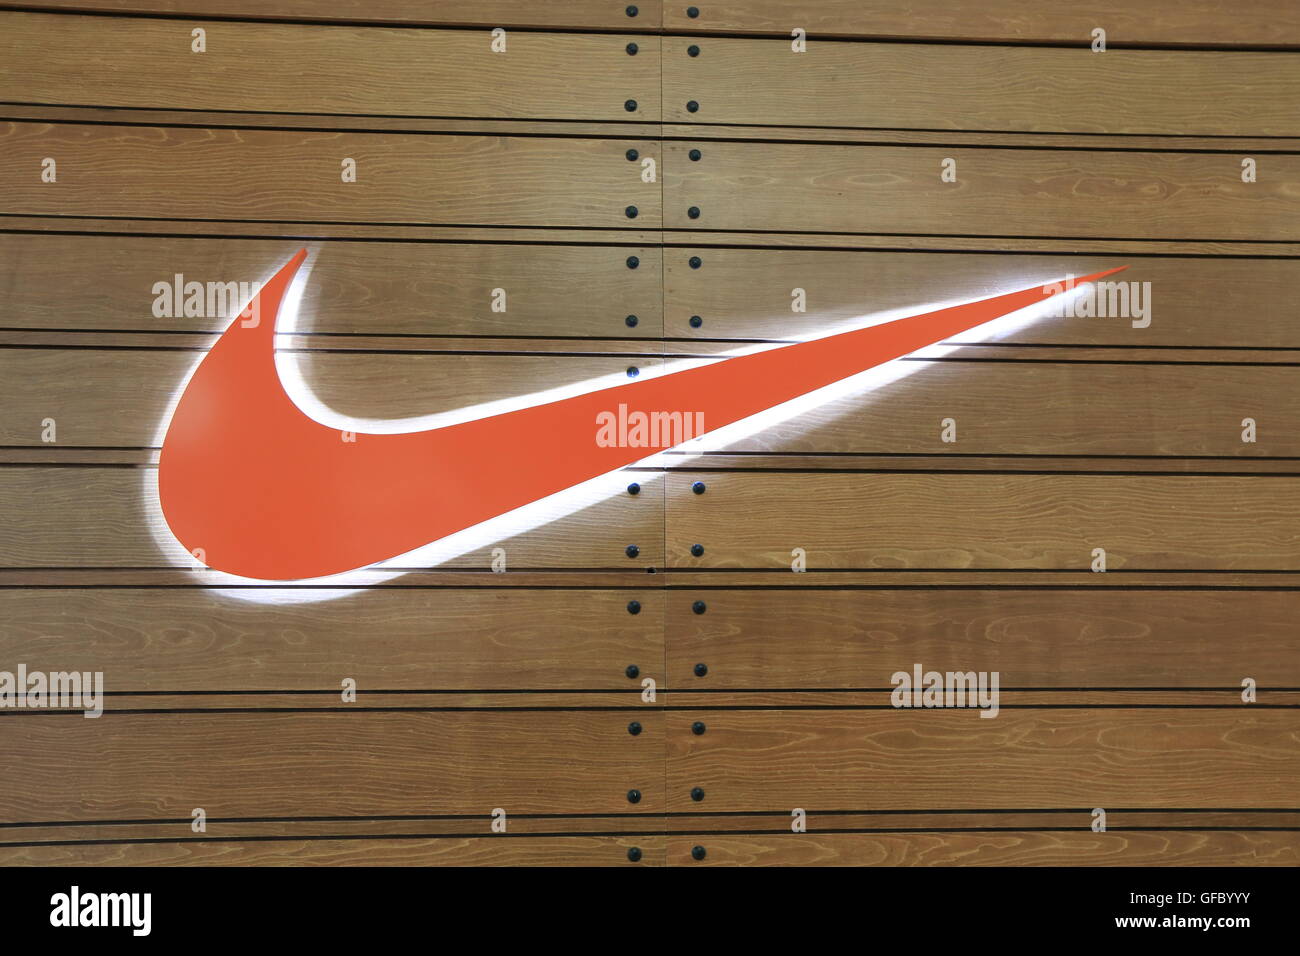 NIKE logo, an American multinational corporation manufacturing footwear, apparel, equipment and accessories. Stock Photo